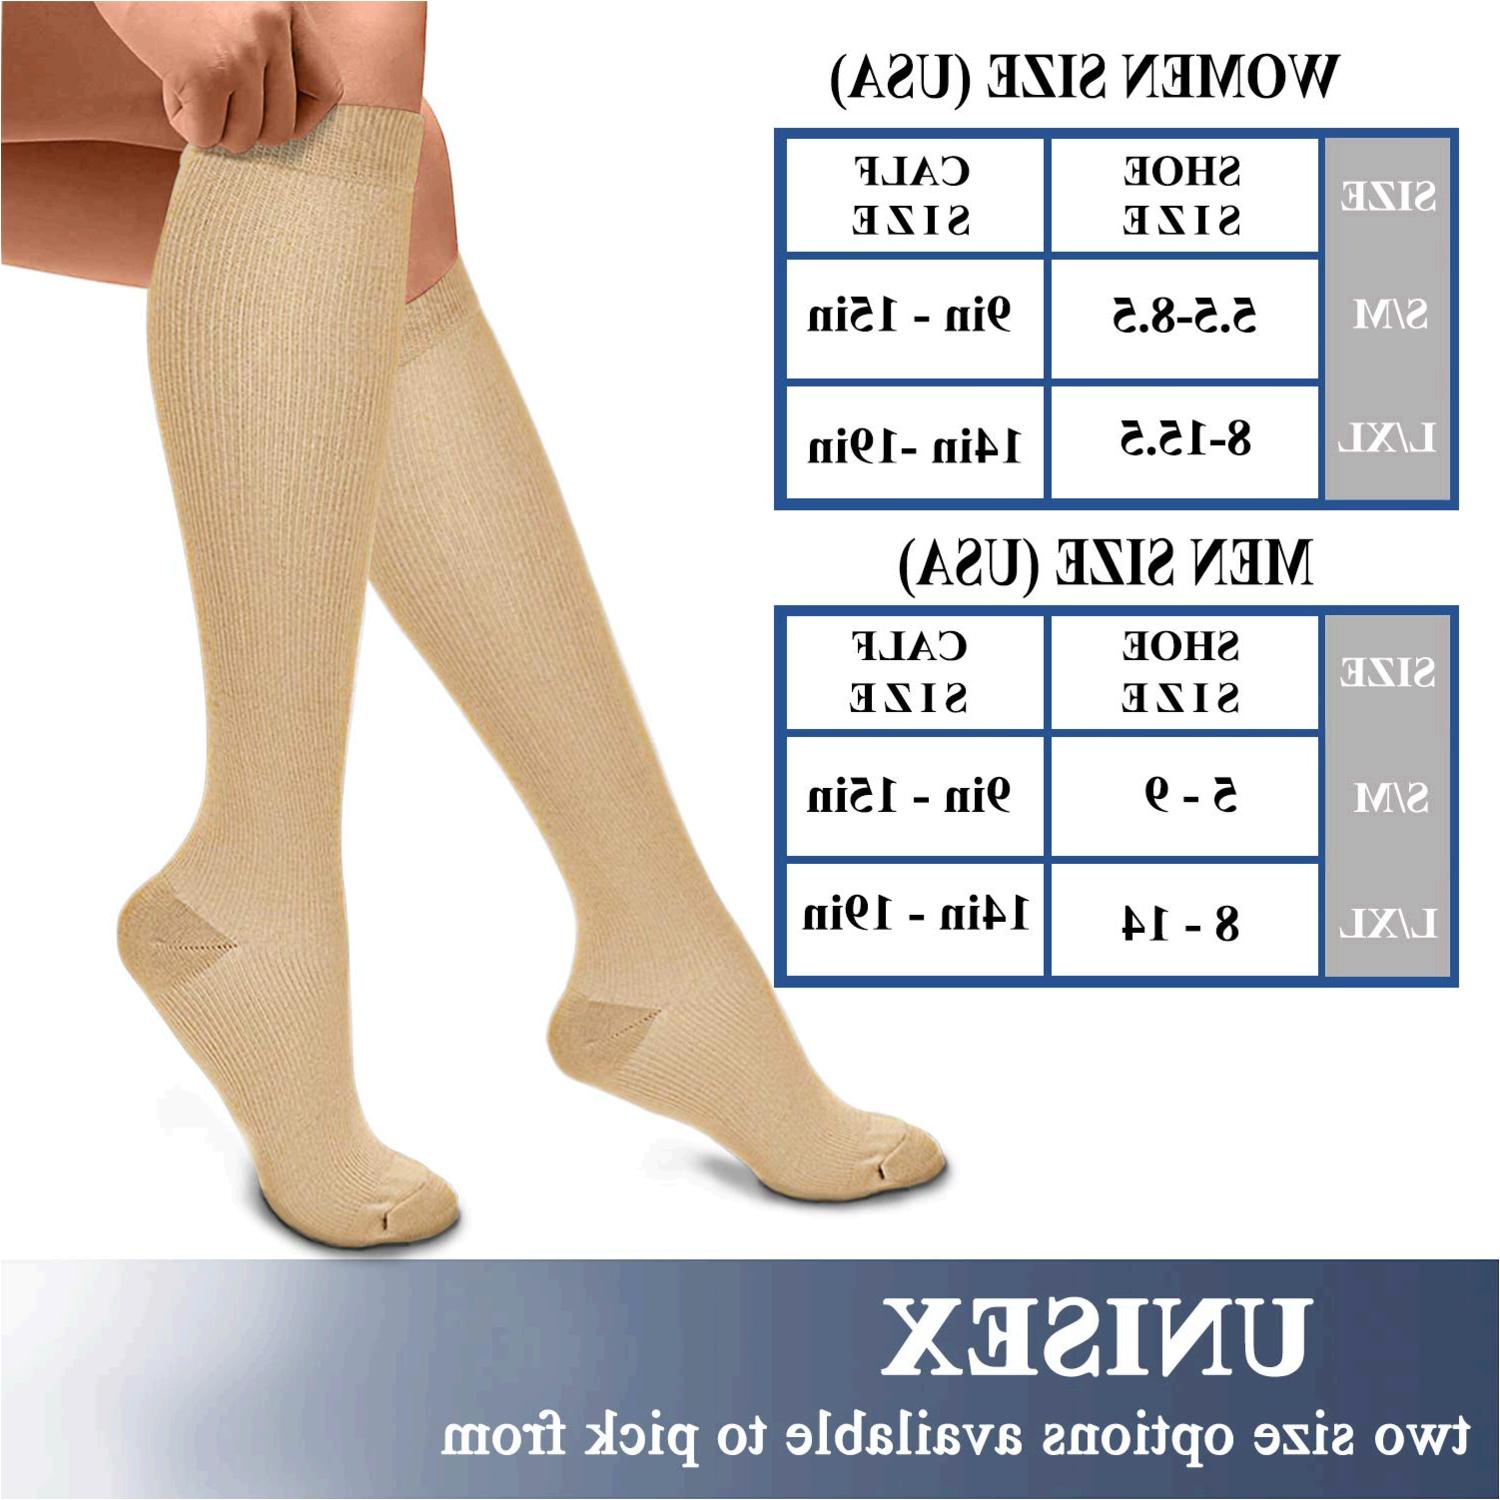 Compression Socks 3 Pairs 15 20 Mmhg Is Best Athletic And 04 Nude Size 55 0d Ebay